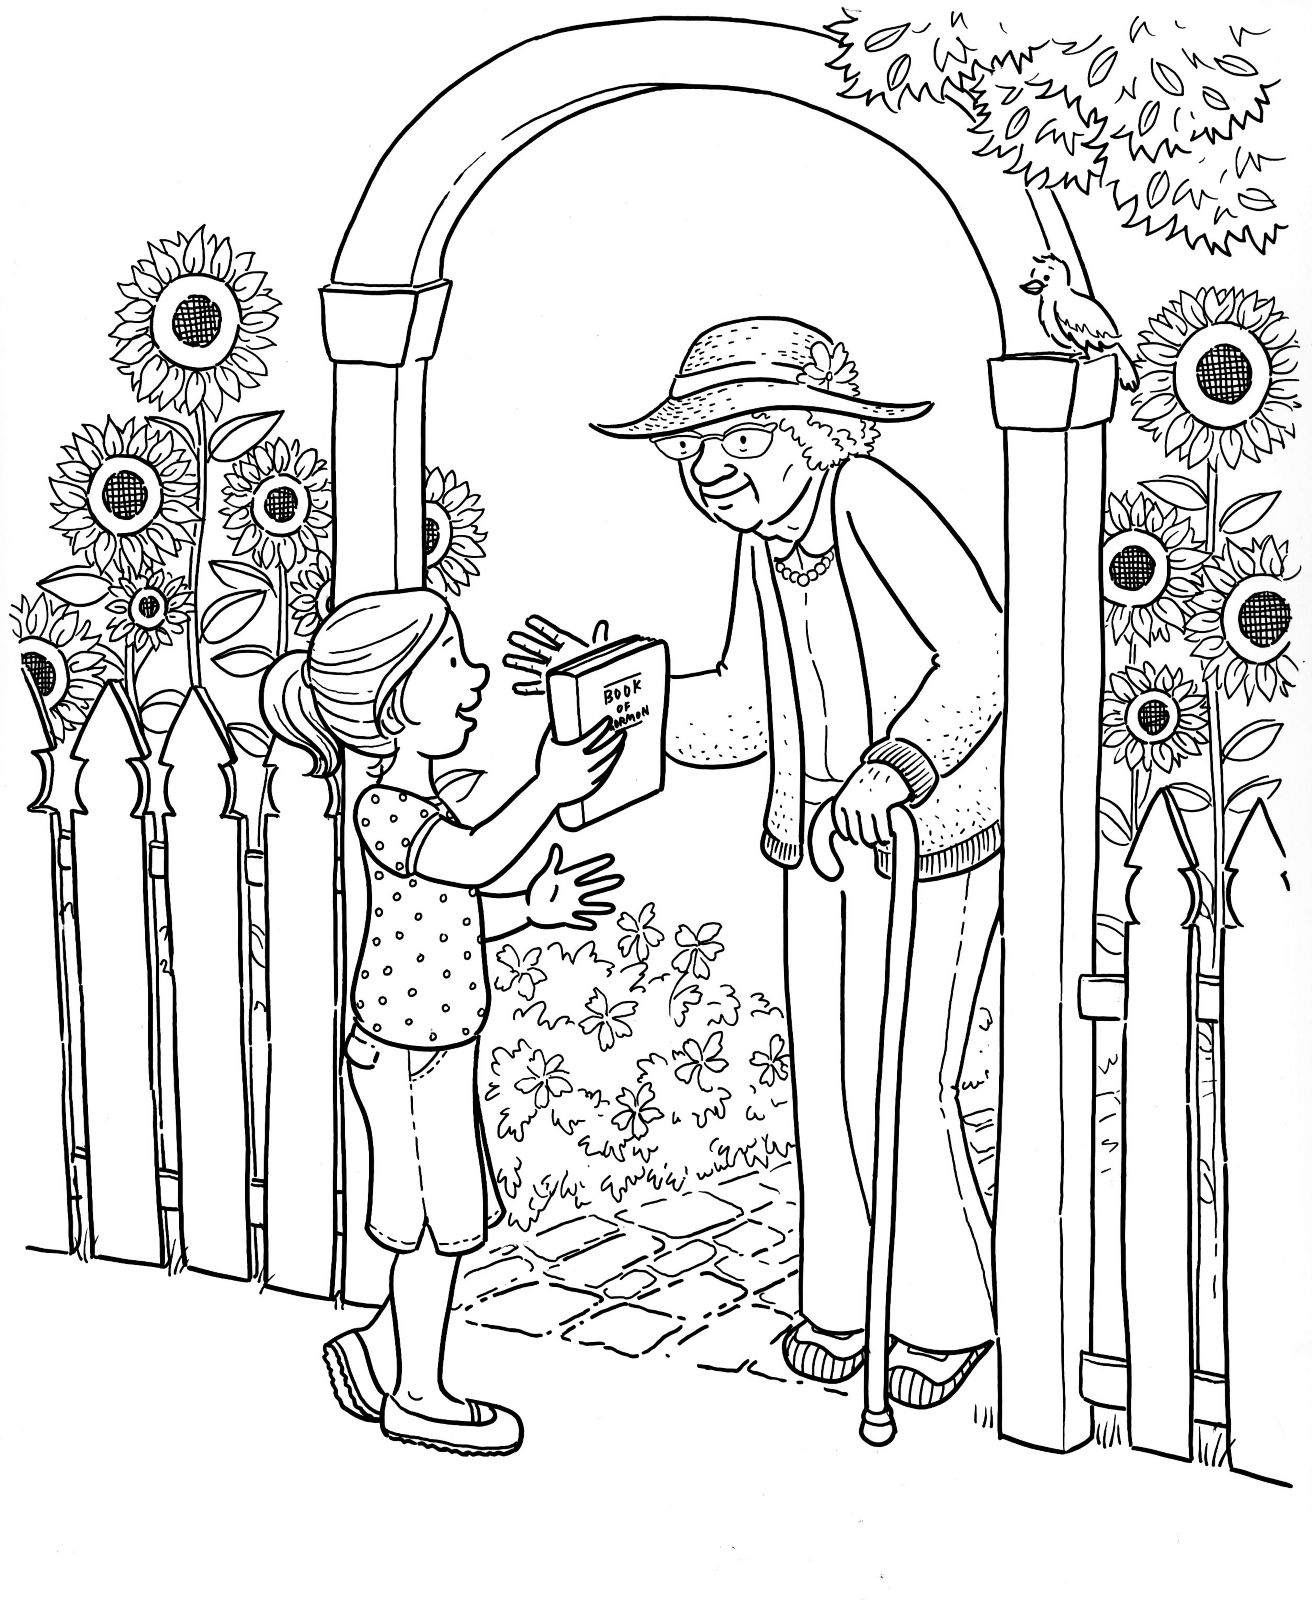 Missionary Coloring Pages at GetColorings.com | Free ...